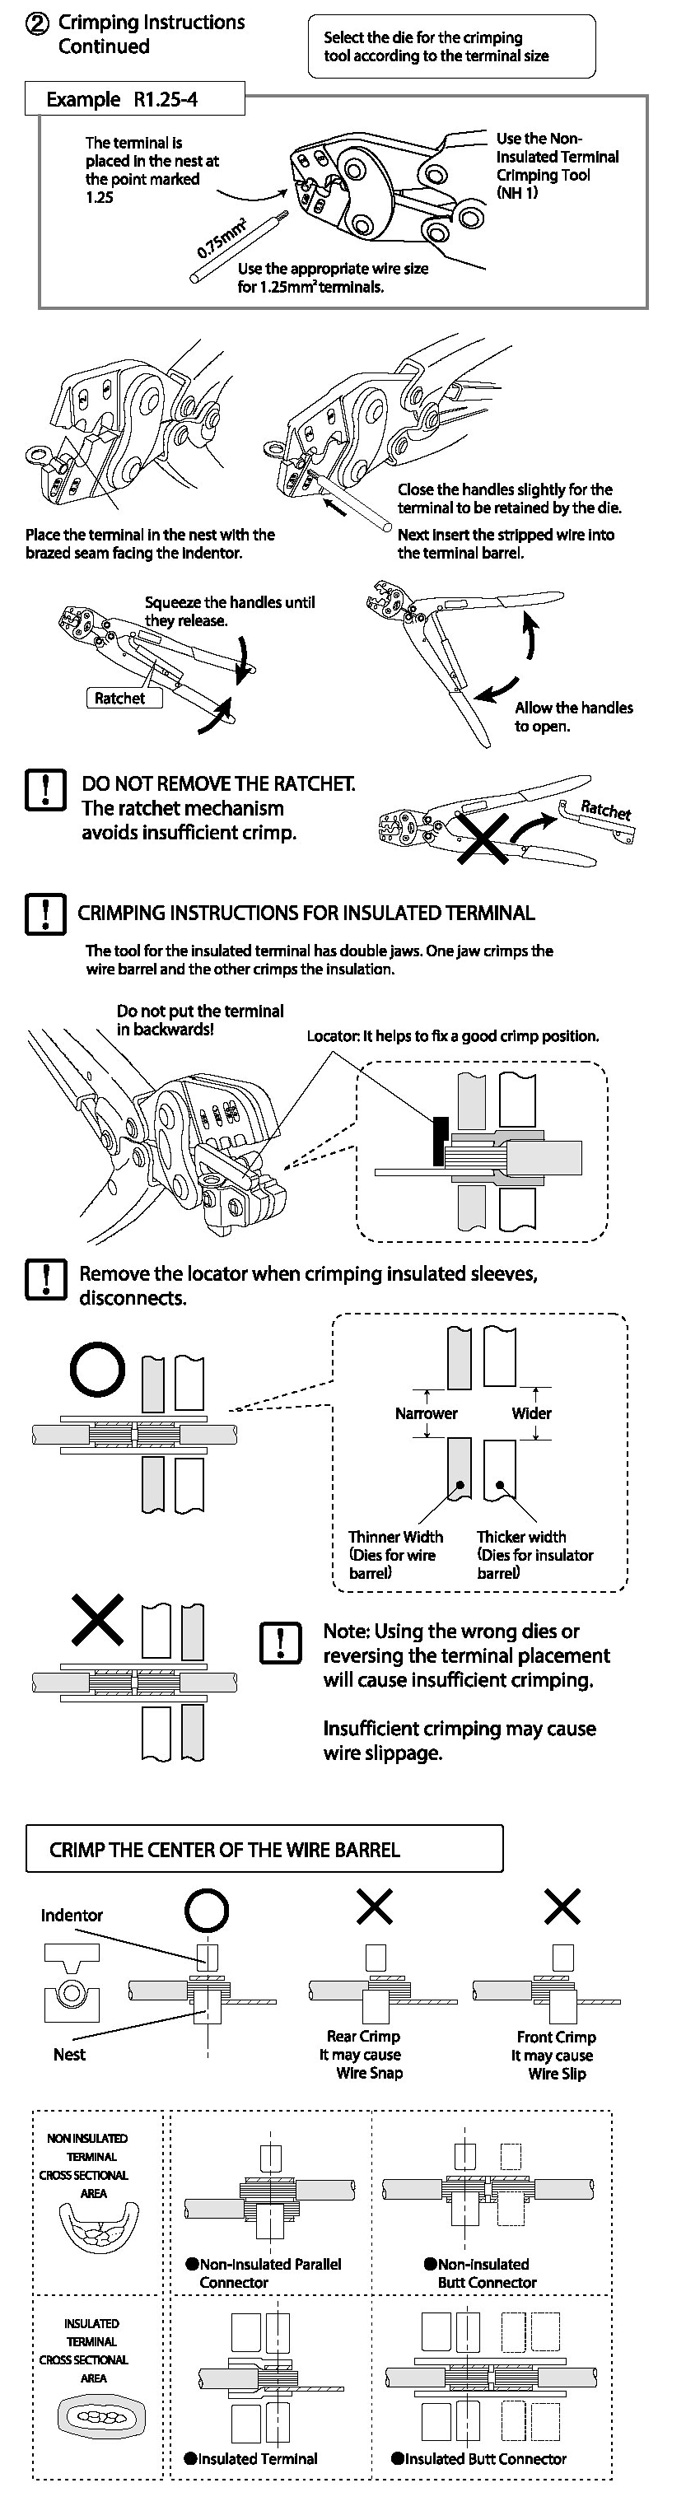 Basic Guide to Terminal Crimping 2. How to Crimp a Terminal